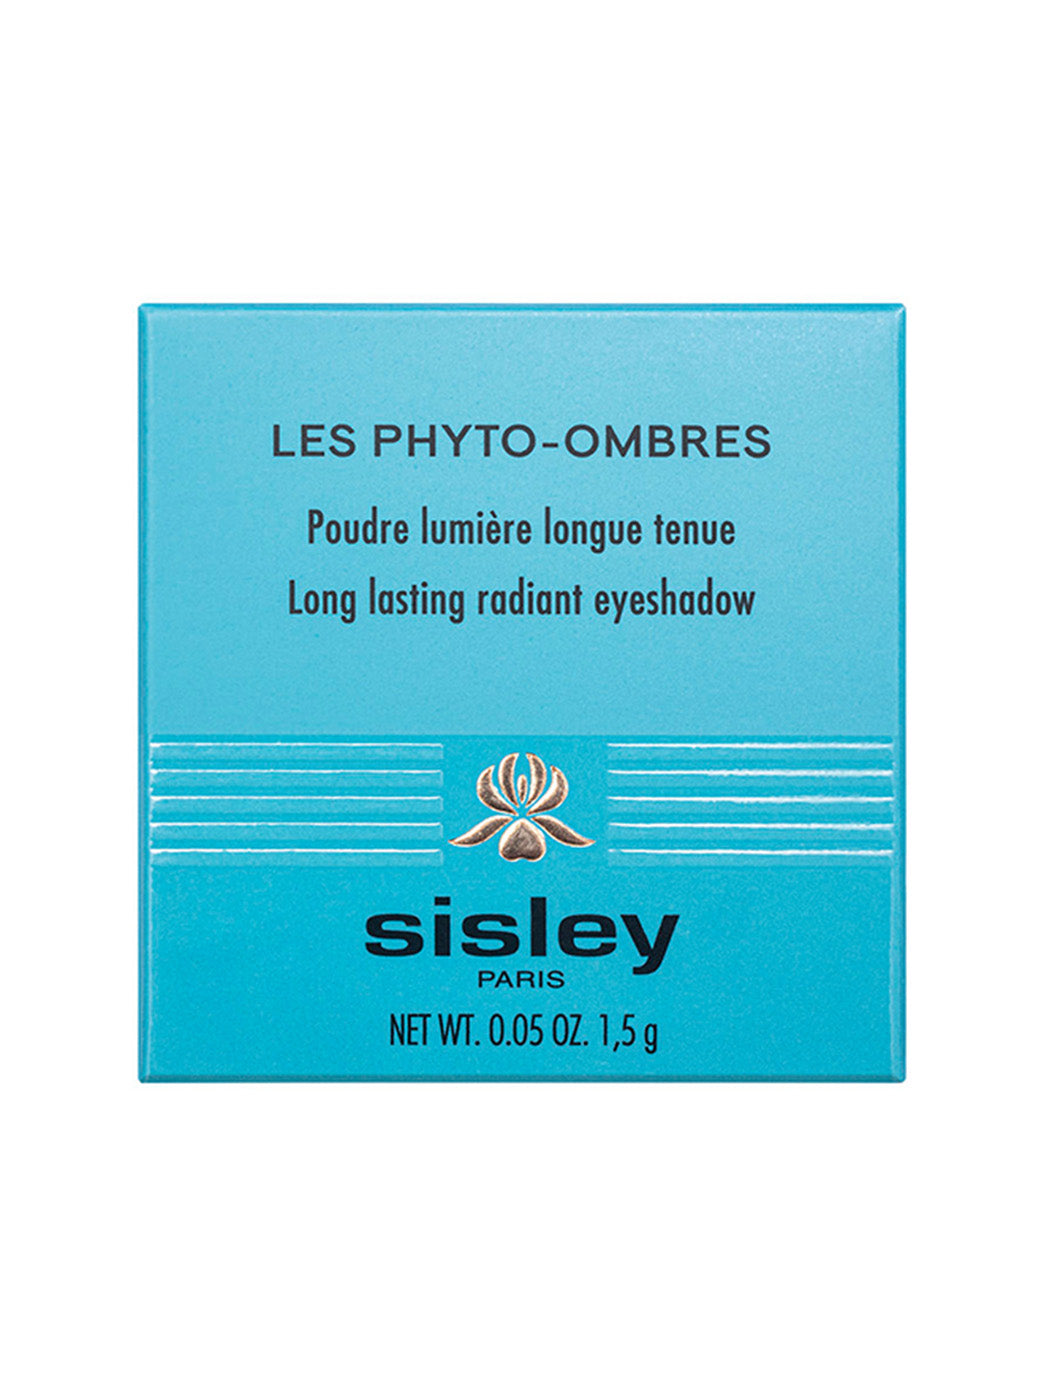 42472956756118 - Les Phyto-Ombres